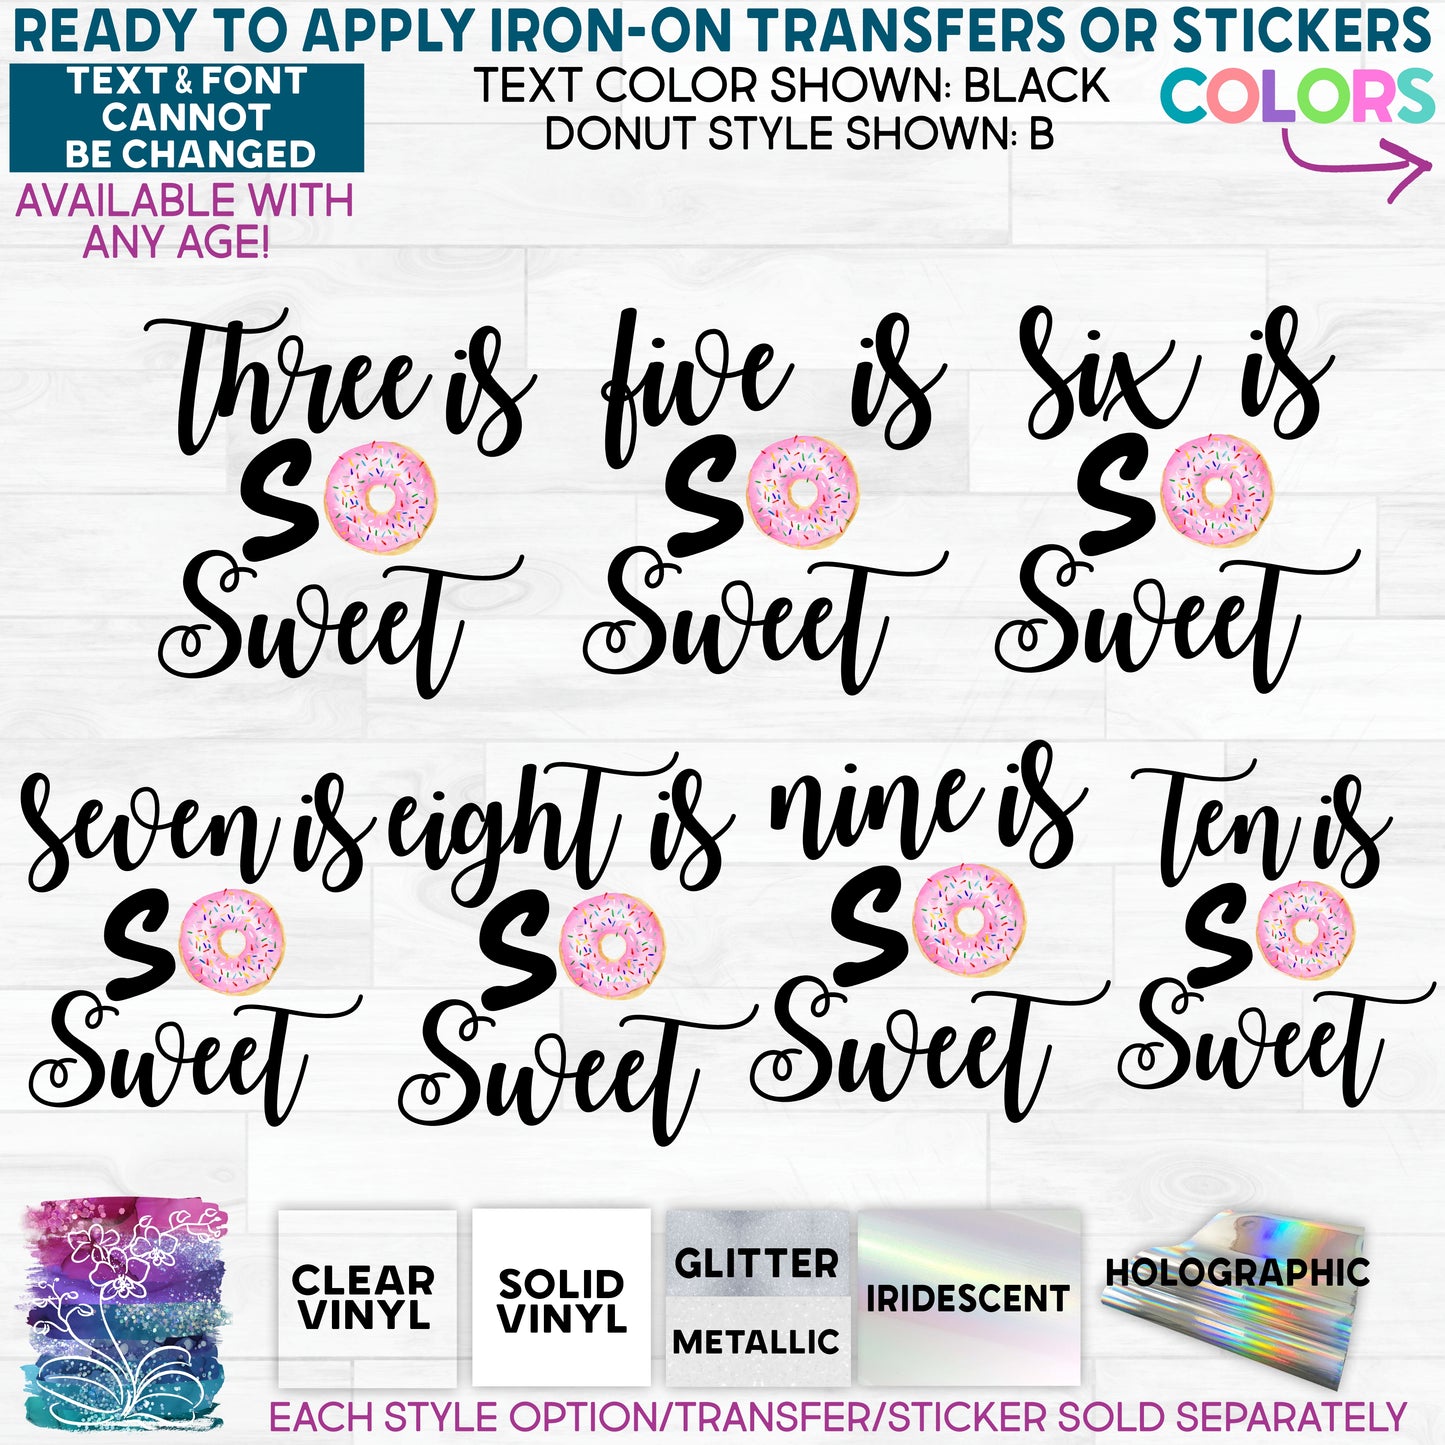 (s242-3) Watercolor Donut Three is So Sweet Glitter or Vinyl Iron-On Transfer or Sticker